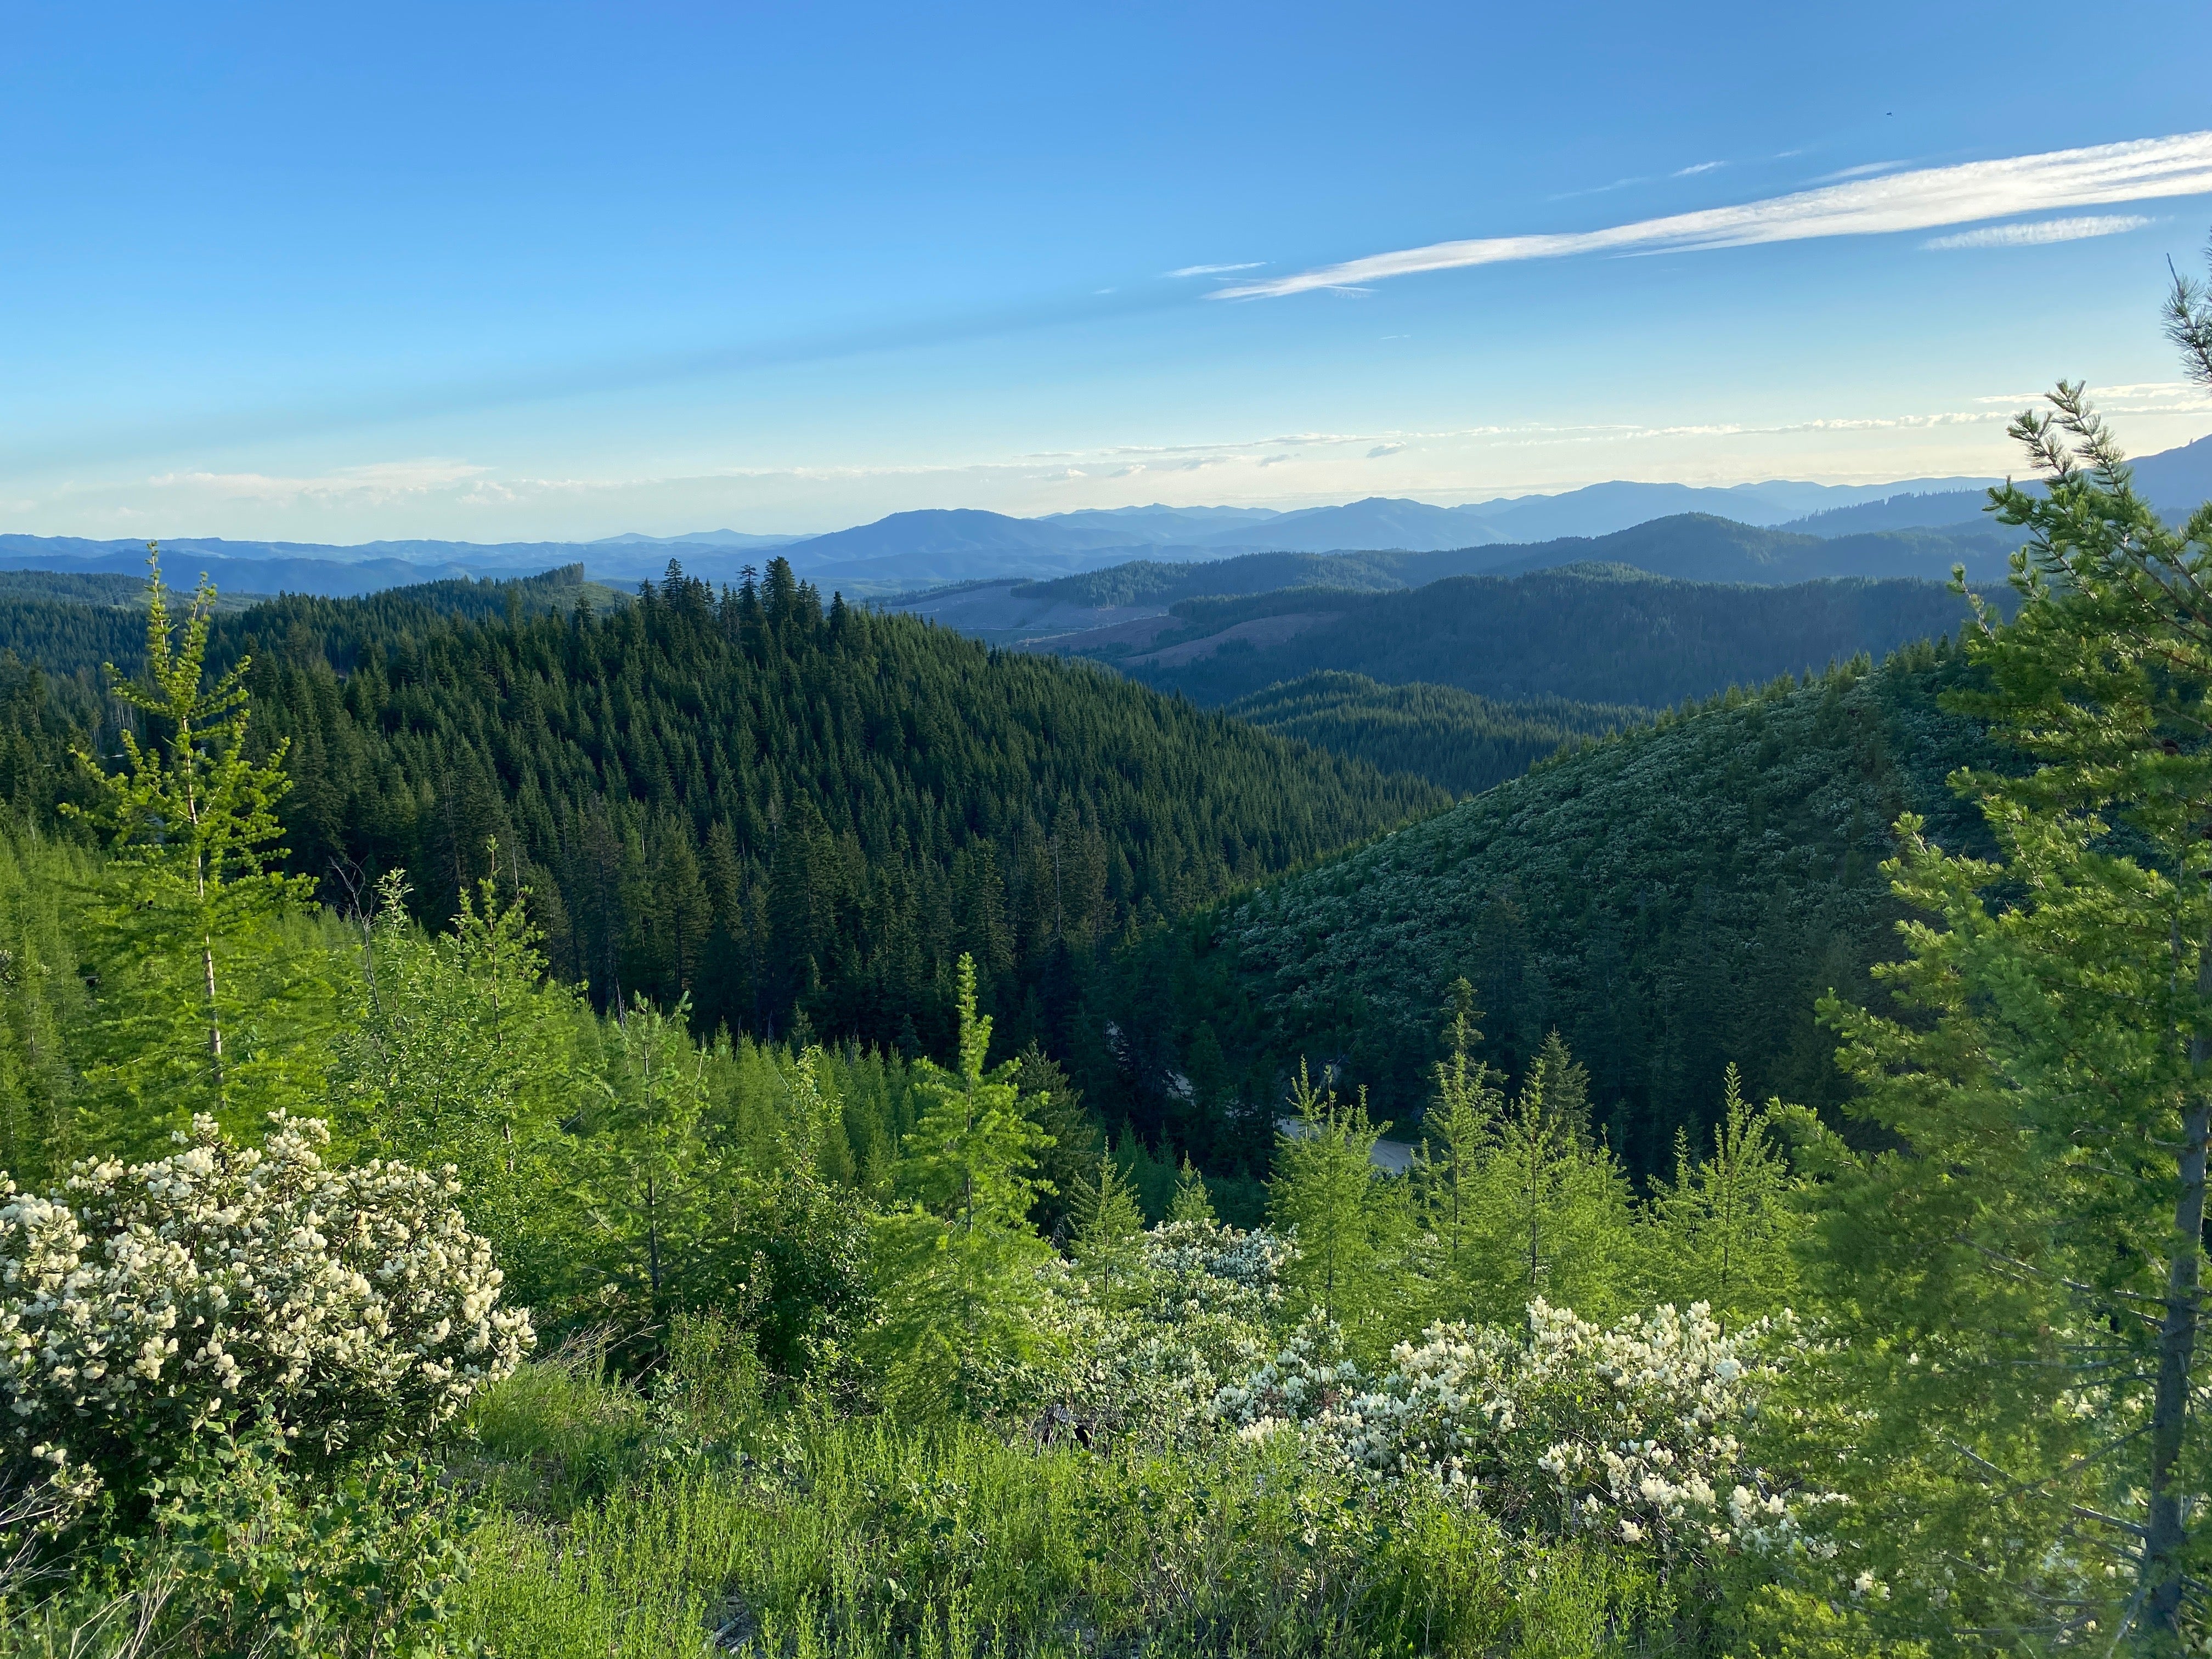 an expansive view of conifer forest mountains with lush green vegetation and wildflowers in the foreground